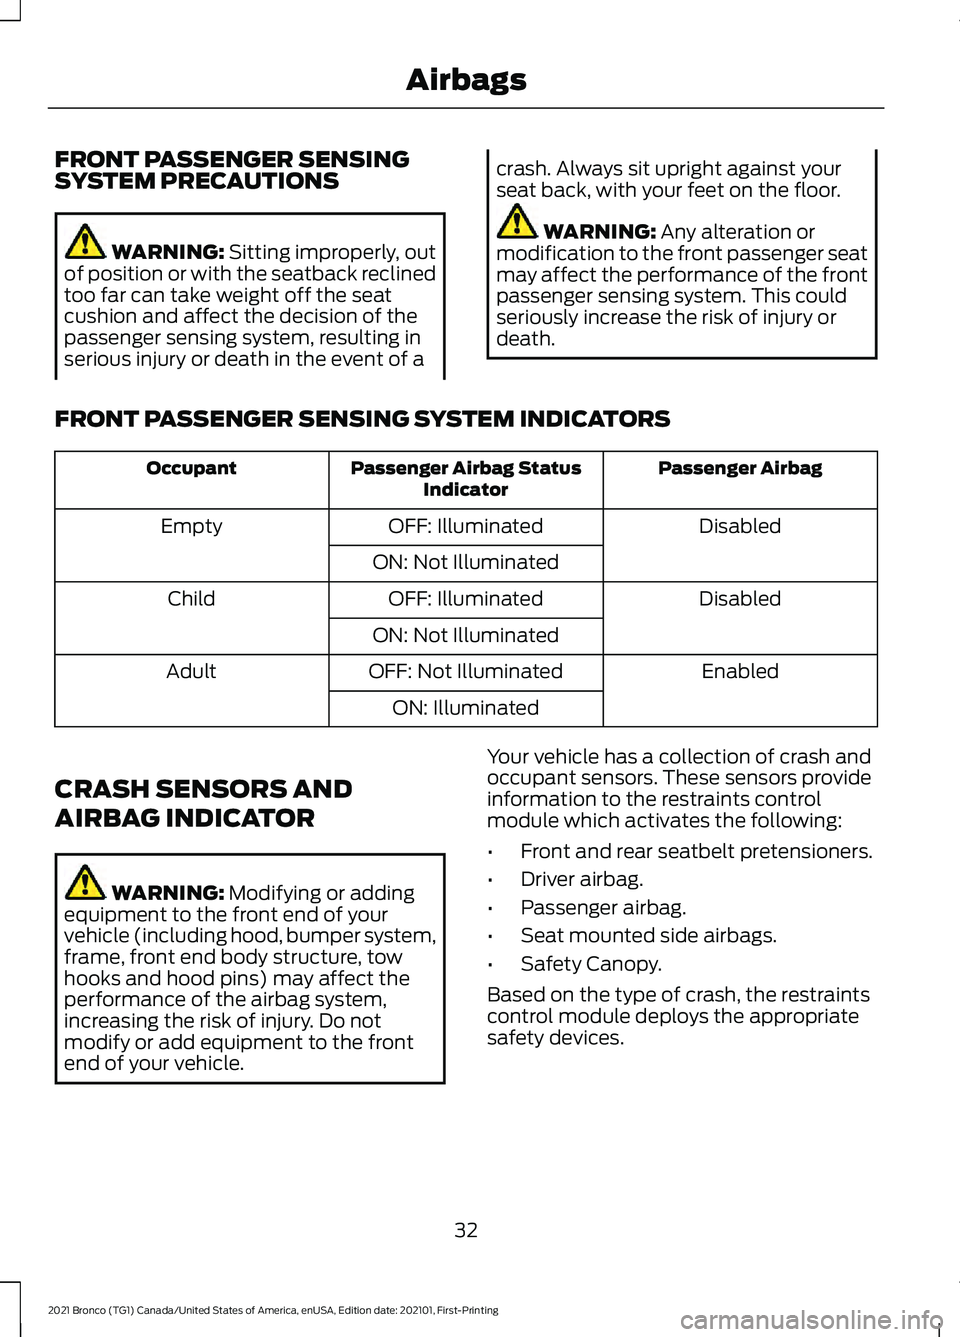 FORD BRONCO 2021  Warranty Guide FRONT PASSENGER SENSING
SYSTEM PRECAUTIONS
WARNING: Sitting improperly, out
of position or with the seatback reclined
too far can take weight off the seat
cushion and affect the decision of the
passen